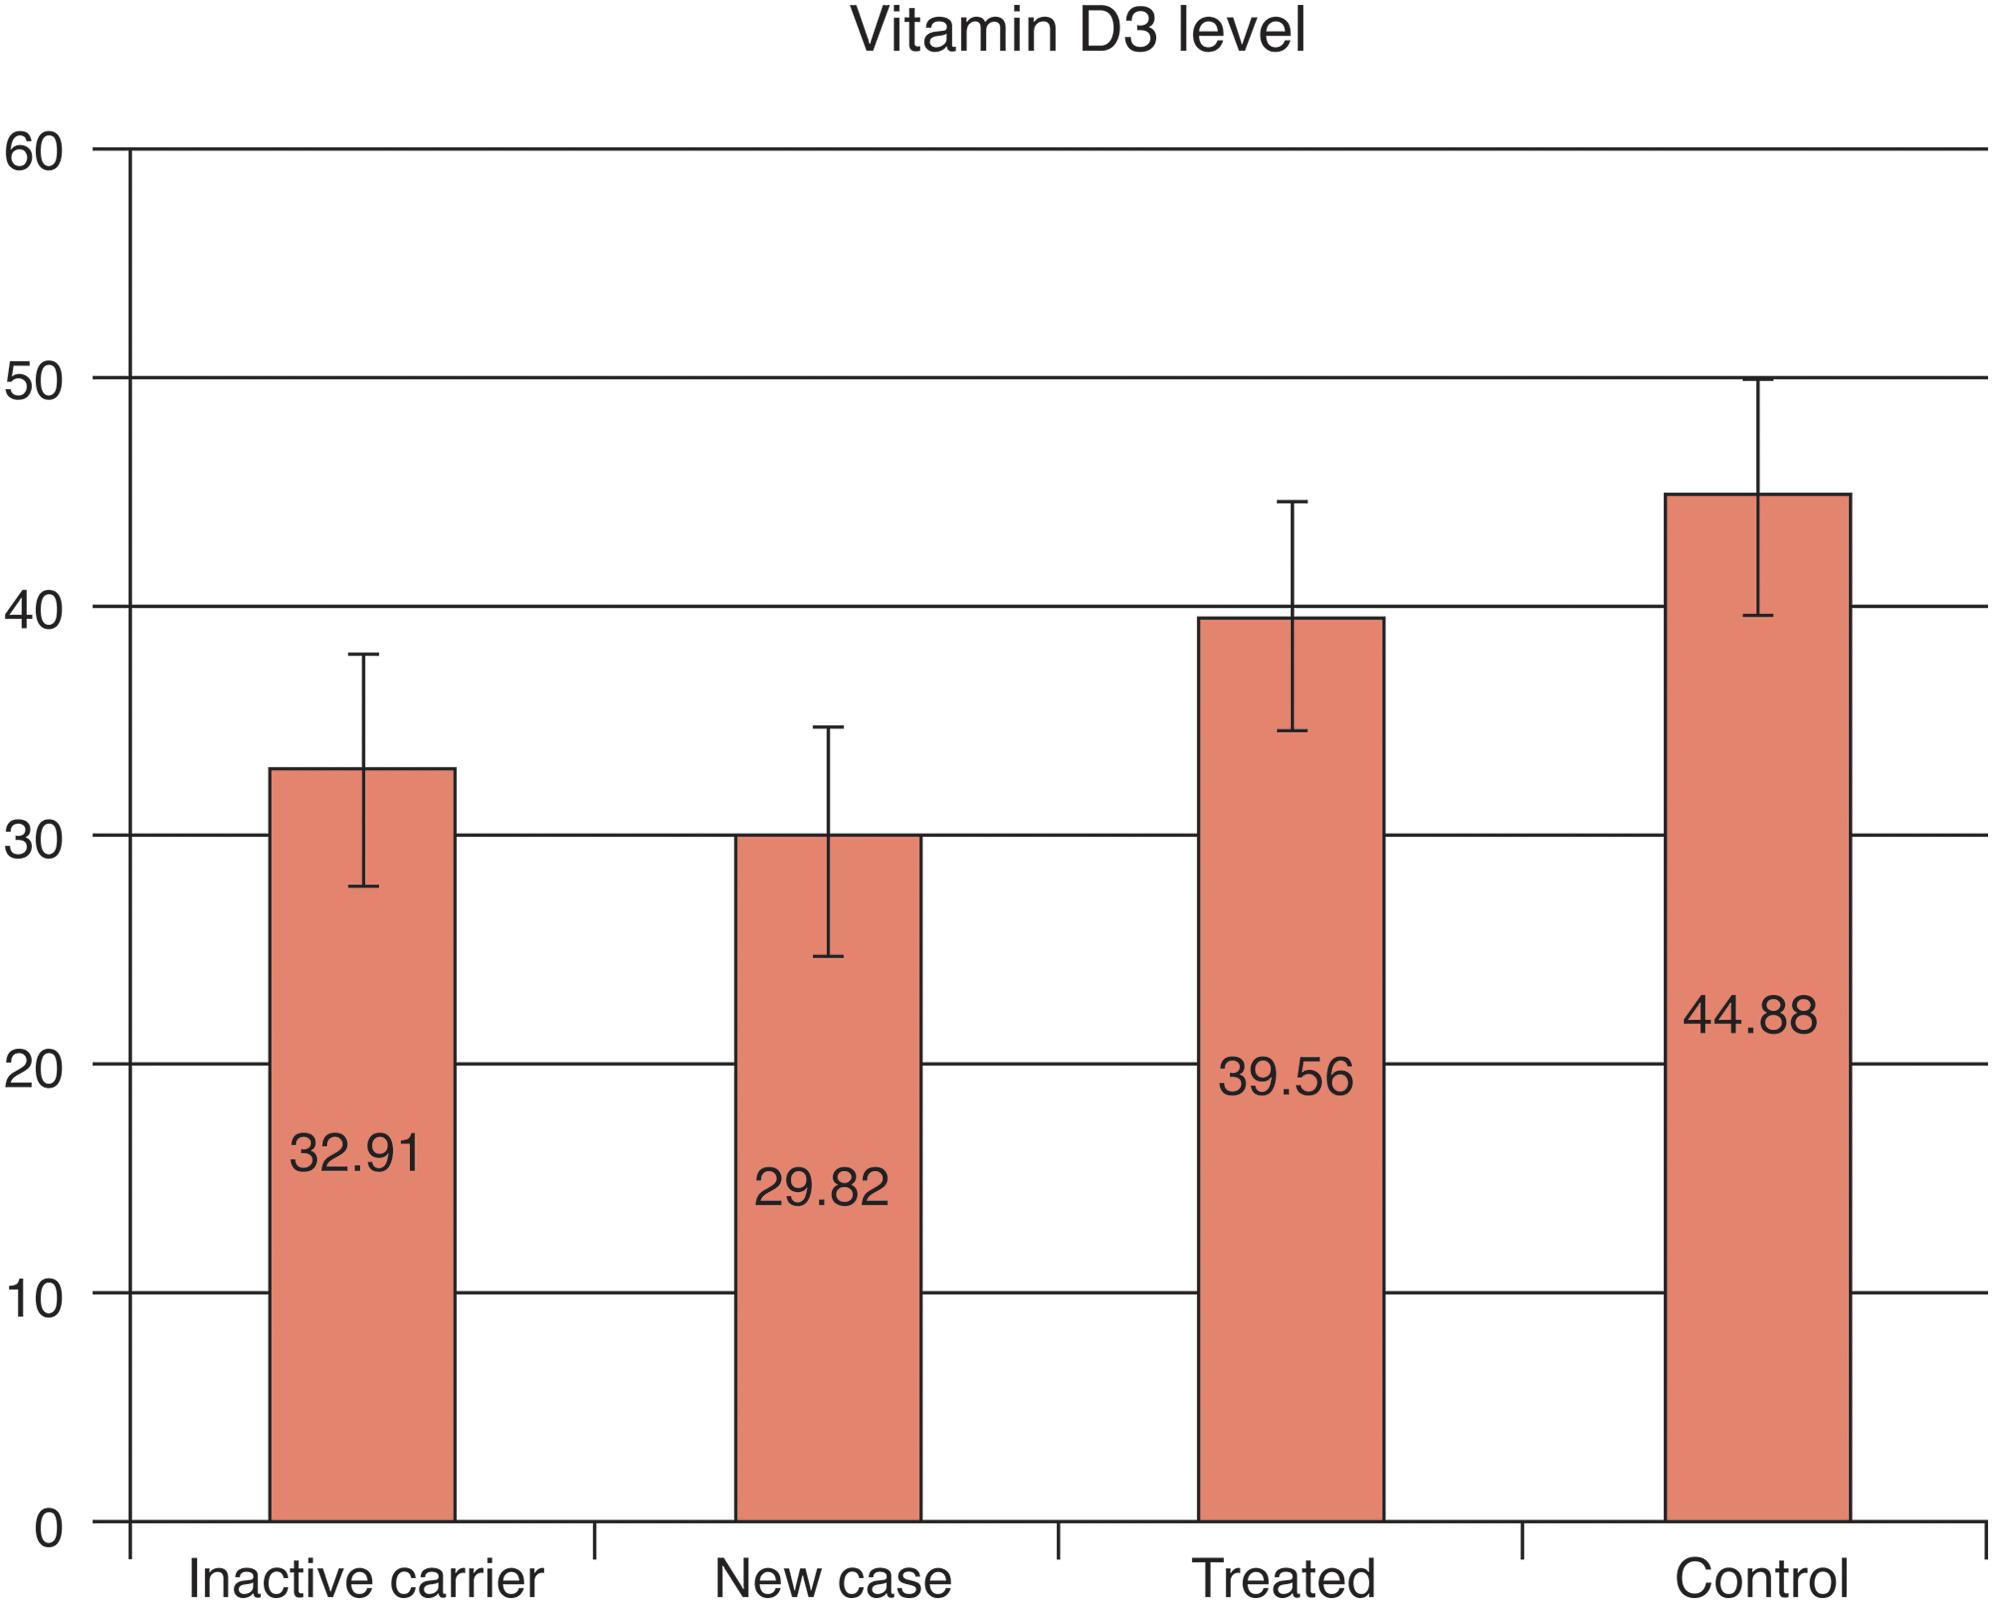 Mean vitamin D3 levels of HBV-infected patients, including inactive carriers, new cases and treated patients, and healthy controls.